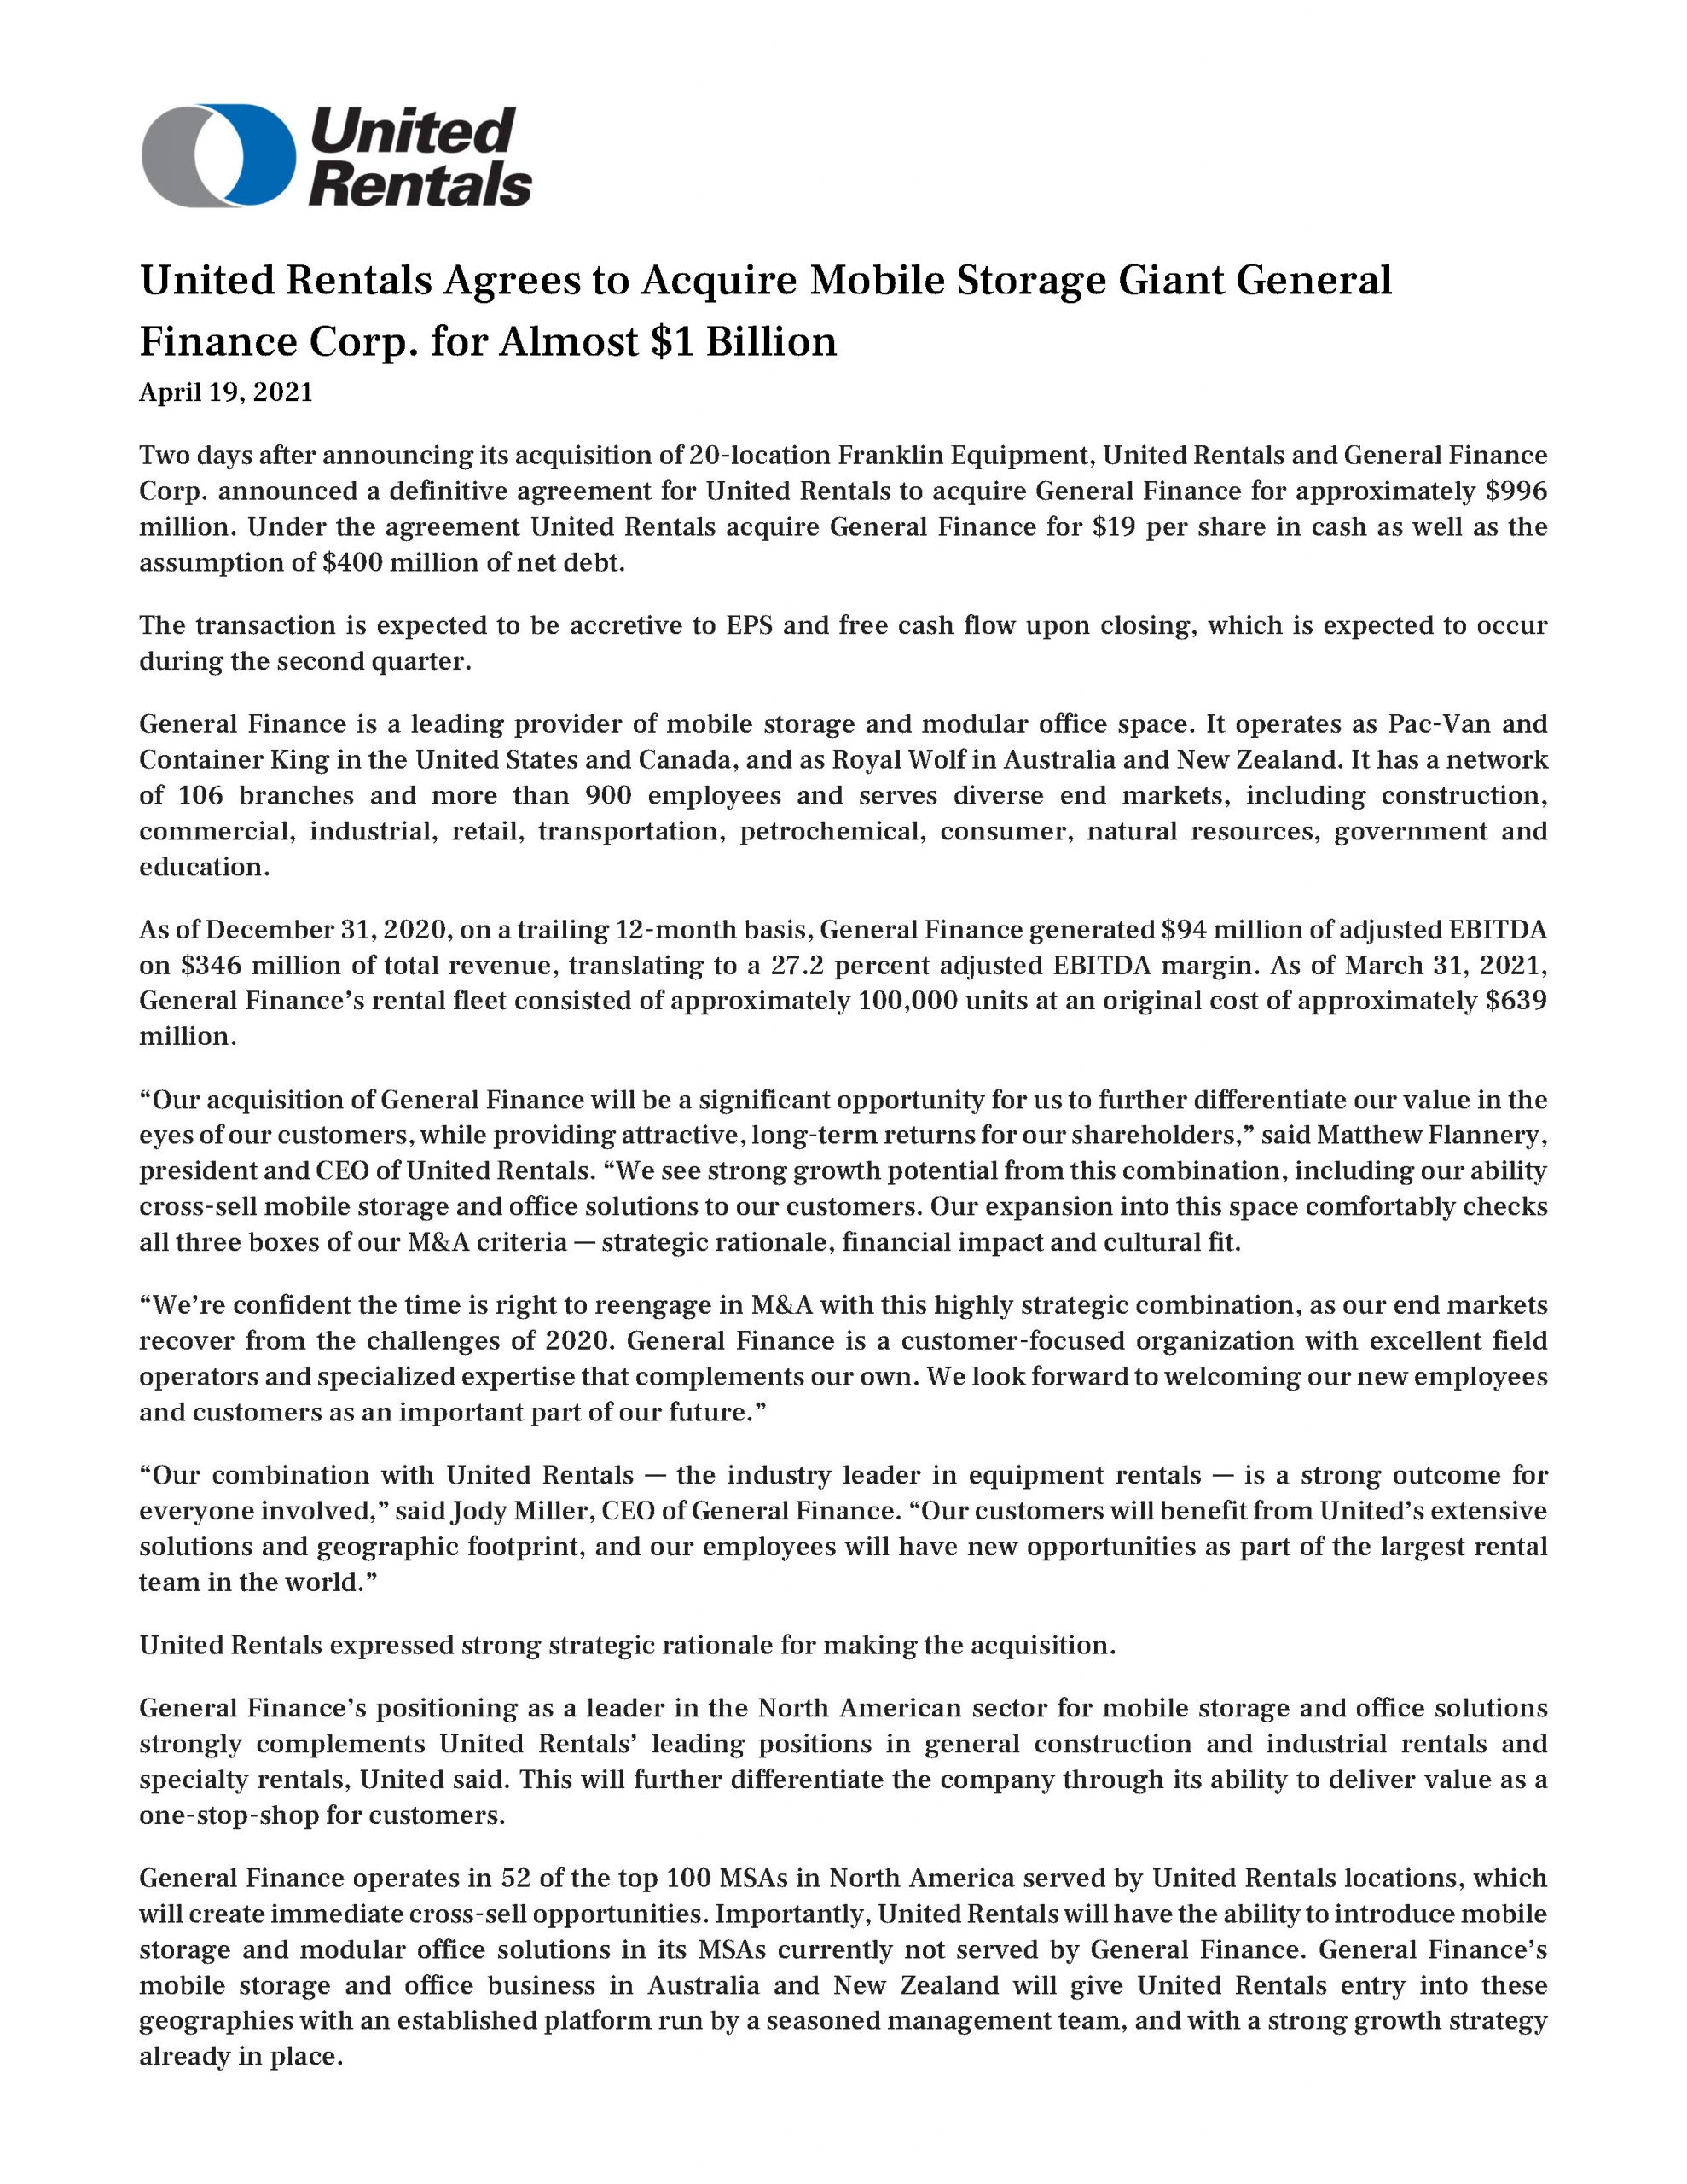 United Rentals Agrees to Acquire Mobile Storage Giant General Finance Corp. for Almost $1 Billion 4.19.2021_Page_1